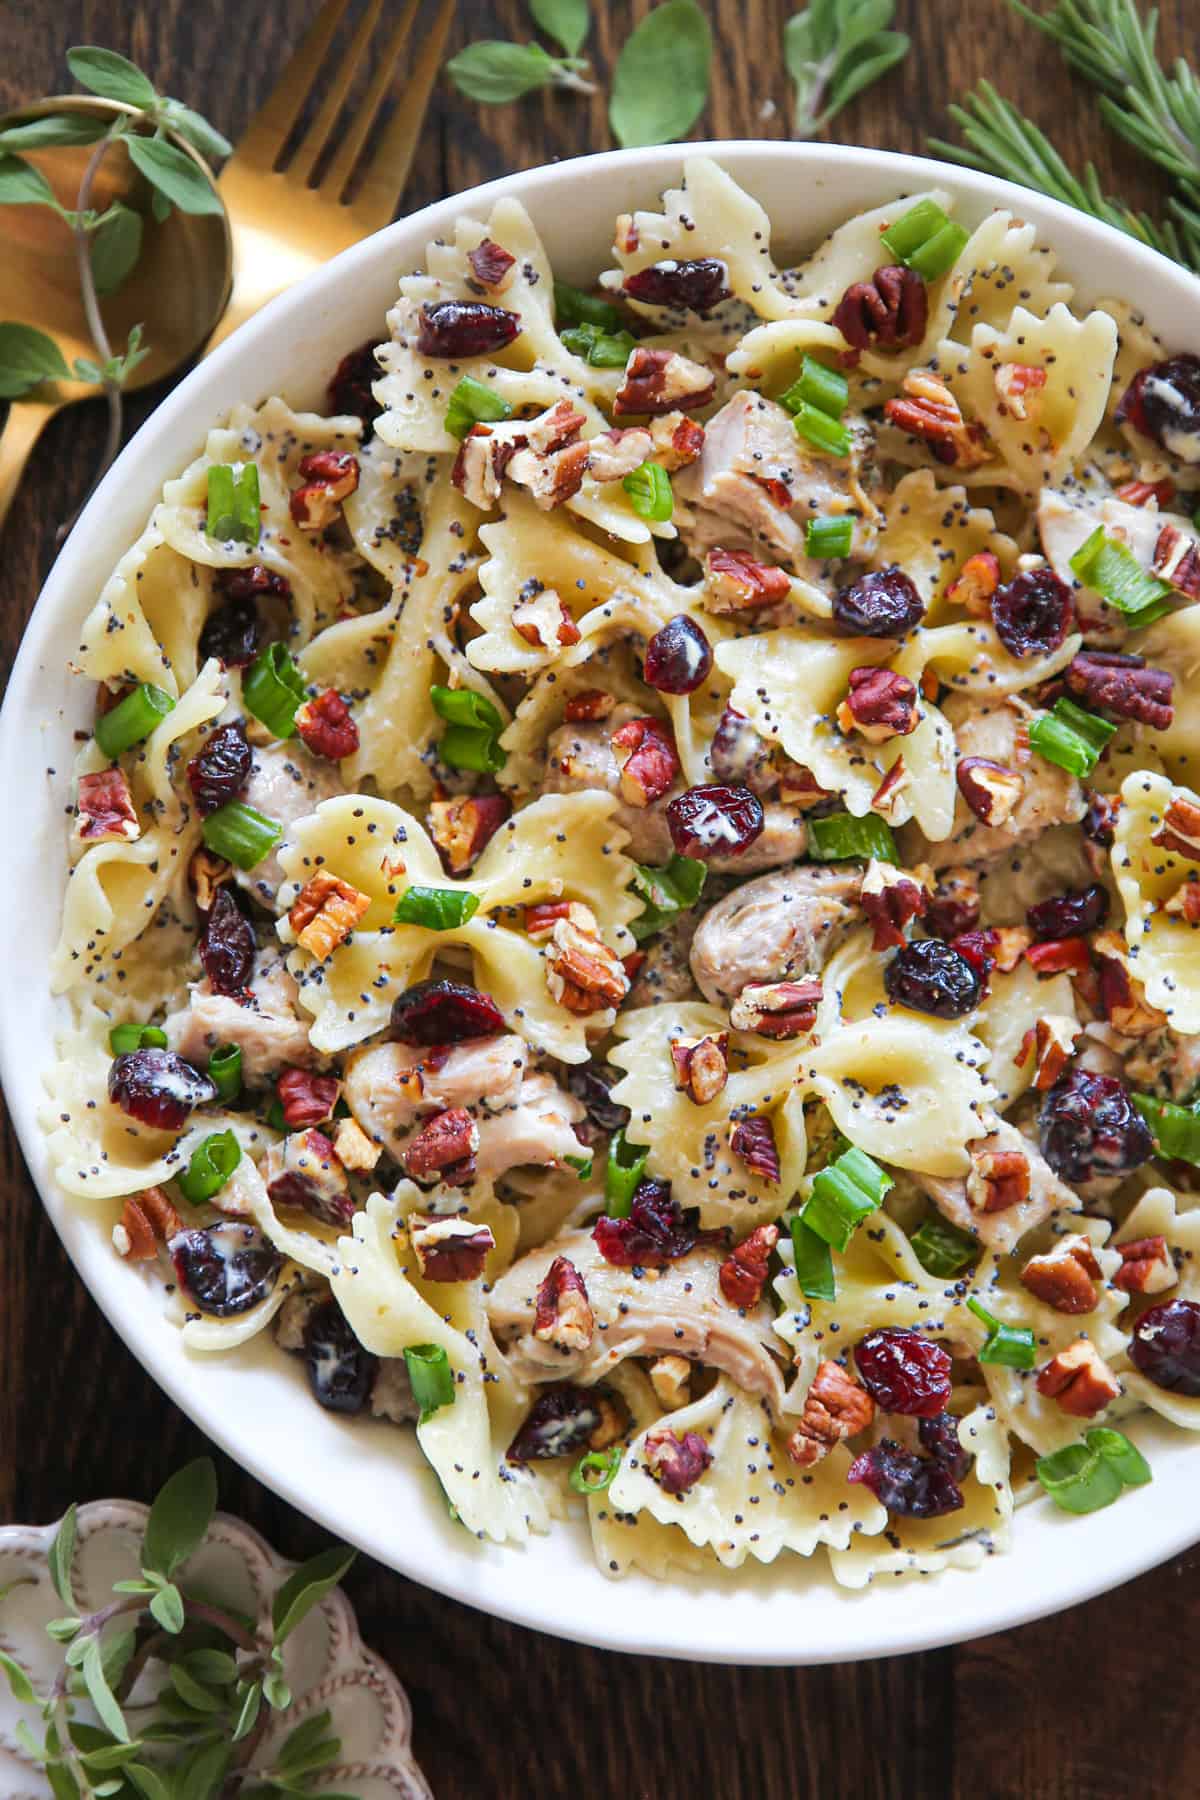 Chicken Pasta Salad with Pecans, Cranberries, and Creamy Poppy Seed Dressing in a white bowl.